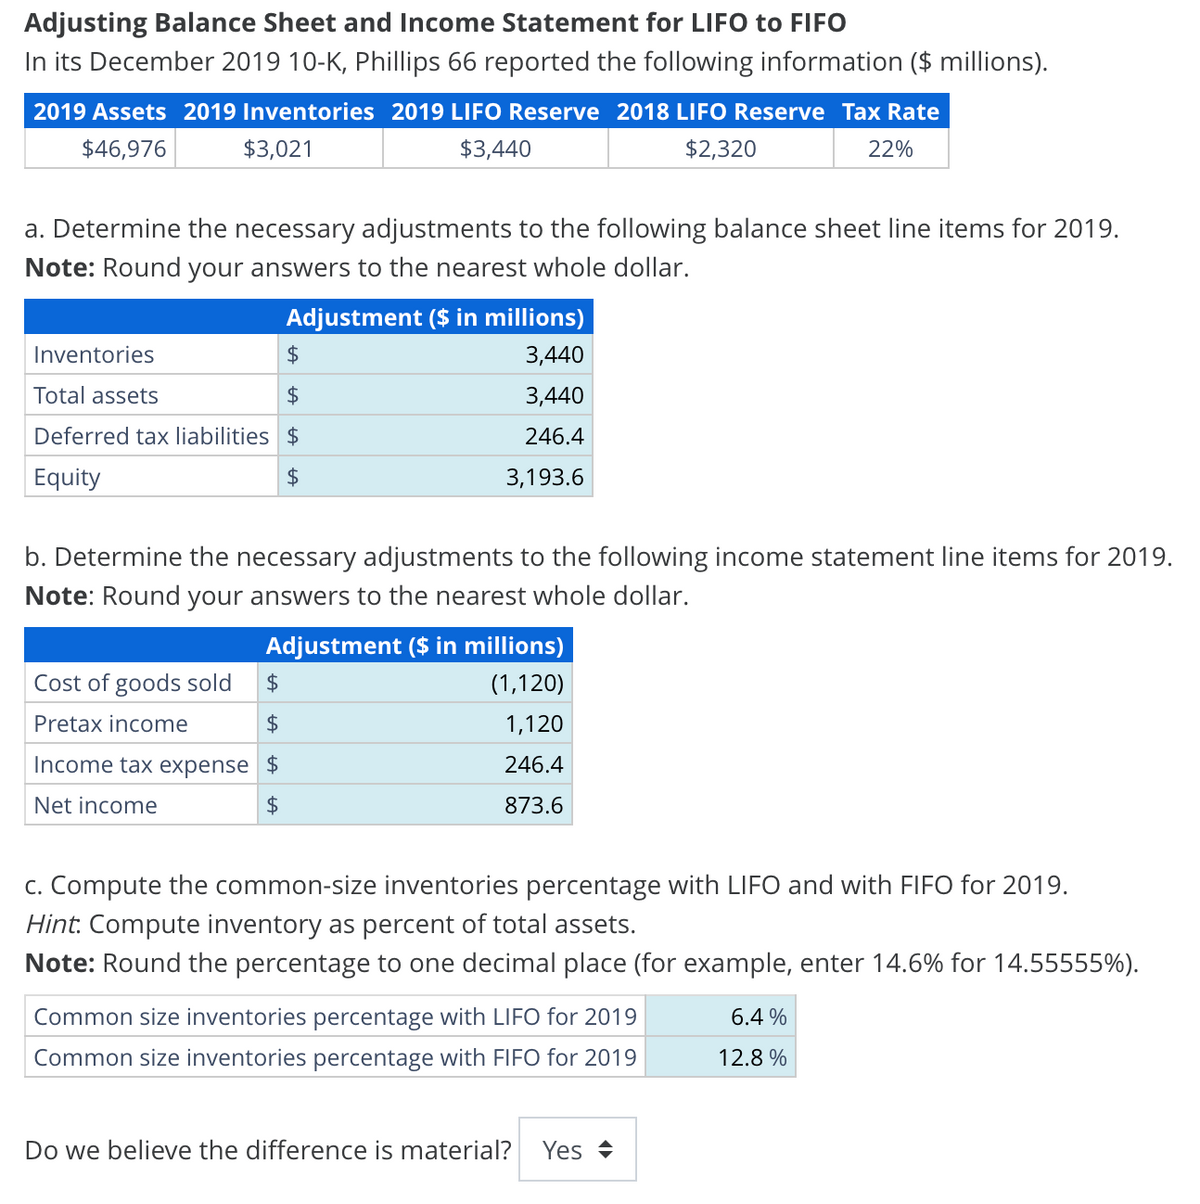 Adjusting Balance Sheet and Income Statement for LIFO to FIFO
In its December 2019 10-K, Phillips 66 reported the following information ($ millions).
2019 Assets 2019 Inventories 2019 LIFO Reserve 2018 LIFO Reserve Tax Rate
$46,976
$3,021
$3,440
$2,320
22%
a. Determine the necessary adjustments to the following balance sheet line items for 2019.
Note: Round your answers to the nearest whole dollar.
Inventories
Total assets
Adjustment ($ in millions)
$
3,440
$
3,440
246.4
$
3,193.6
Deferred tax liabilities $
Equity
b. Determine the necessary adjustments to the following income statement line items for 2019.
Note: Round your answers to the nearest whole dollar.
Adjustment ($ in millions)
Cost of goods sold
$
(1,120)
Pretax income
$
1,120
Income tax expense
$
246.4
Net income
$
873.6
c. Compute the common-size inventories percentage with LIFO and with FIFO for 2019.
Hint. Compute inventory as percent of total assets.
Note: Round the percentage to one decimal place (for example, enter 14.6% for 14.55555%).
Common size inventories percentage with LIFO for 2019
Common size inventories percentage with FIFO for 2019
6.4%
12.8%
Do we believe the difference is material? Yes =